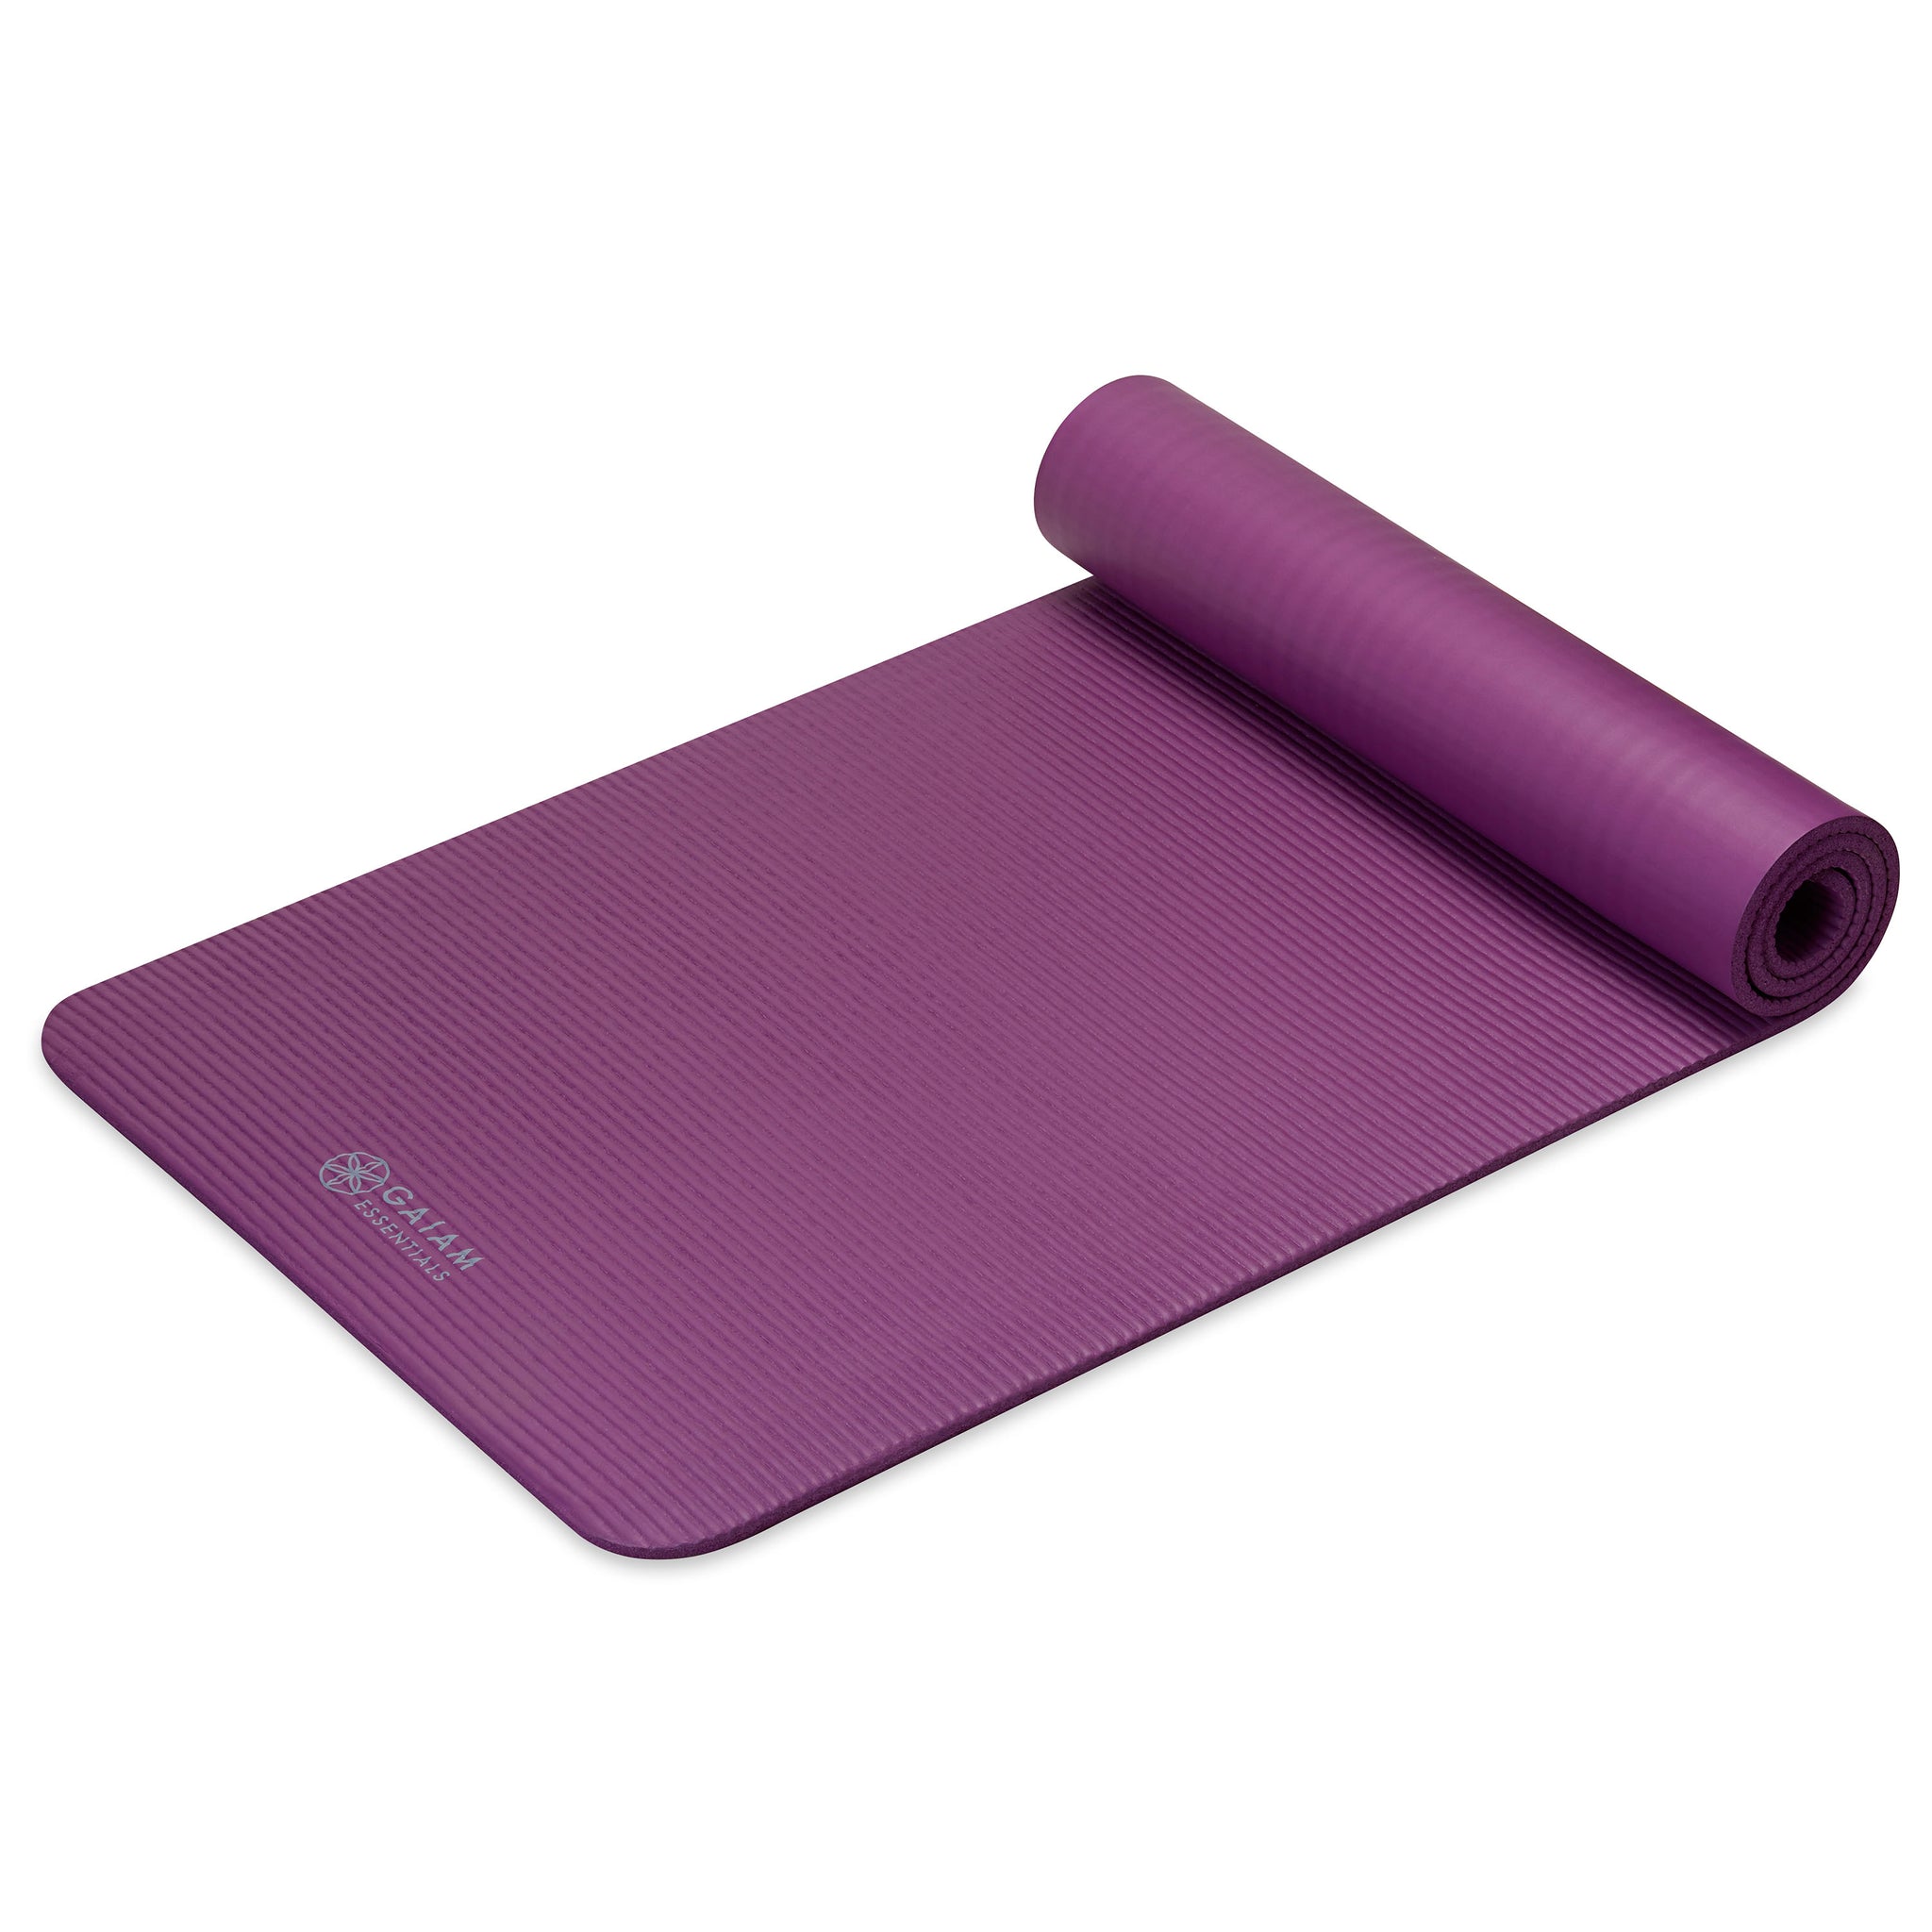  Gaiam Essentials Thick Yoga Mat Fitness & Exercise Mat with  Easy-Cinch Carrier Strap, Black, 72L X 24W X 2/5 Inch Thick : Sports &  Outdoors